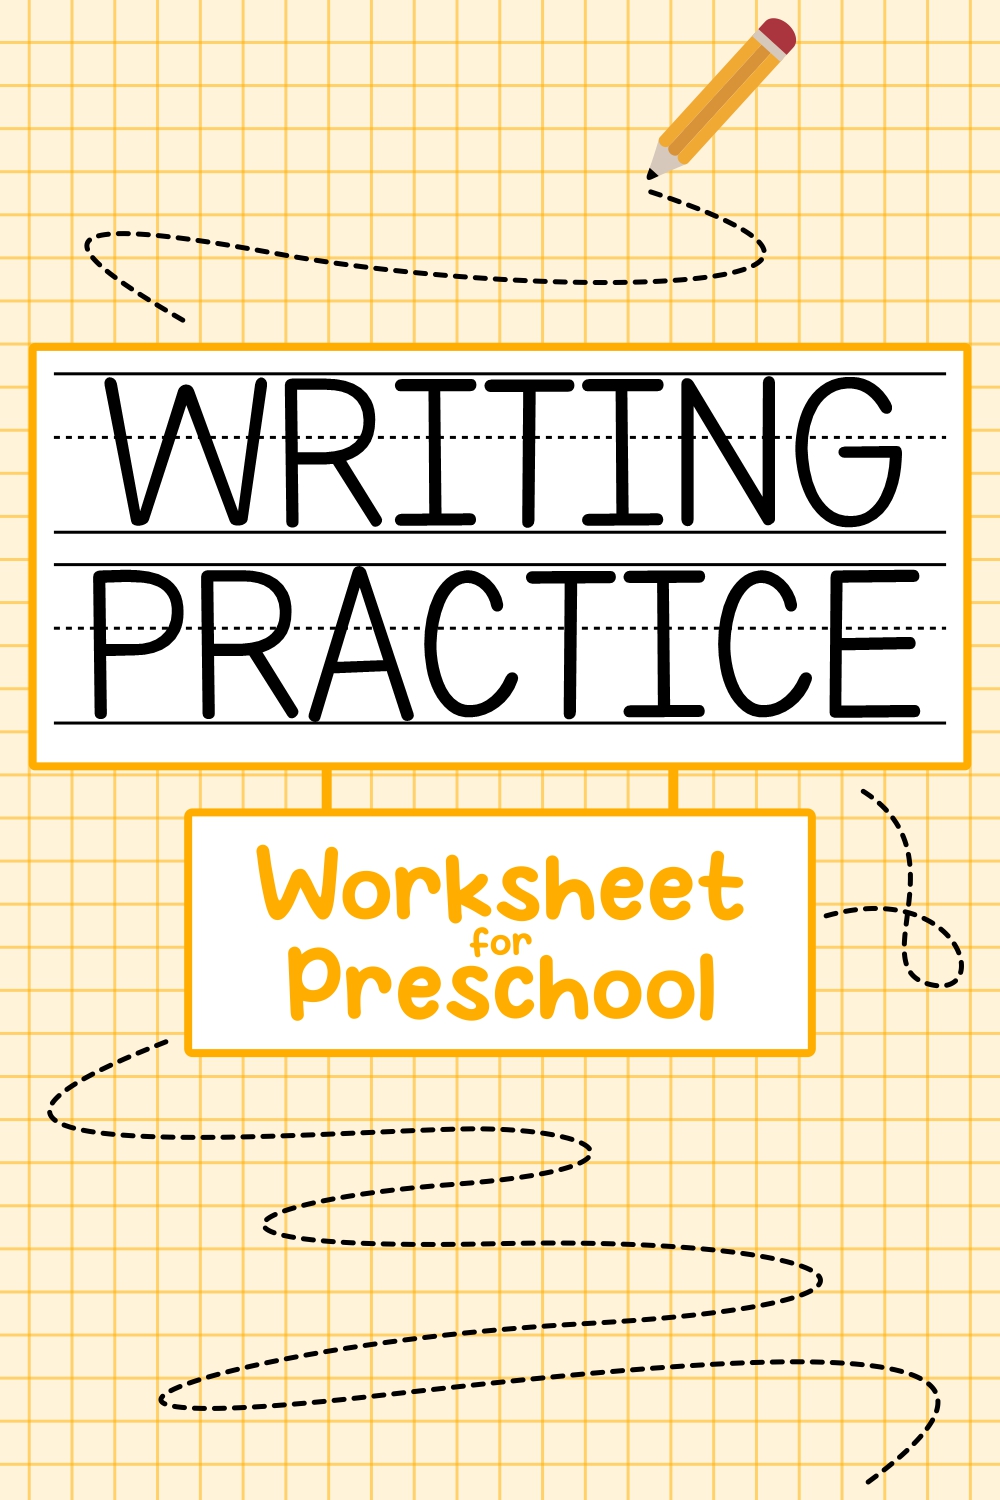 16 Images of Writing Practice Worksheets For Preschool